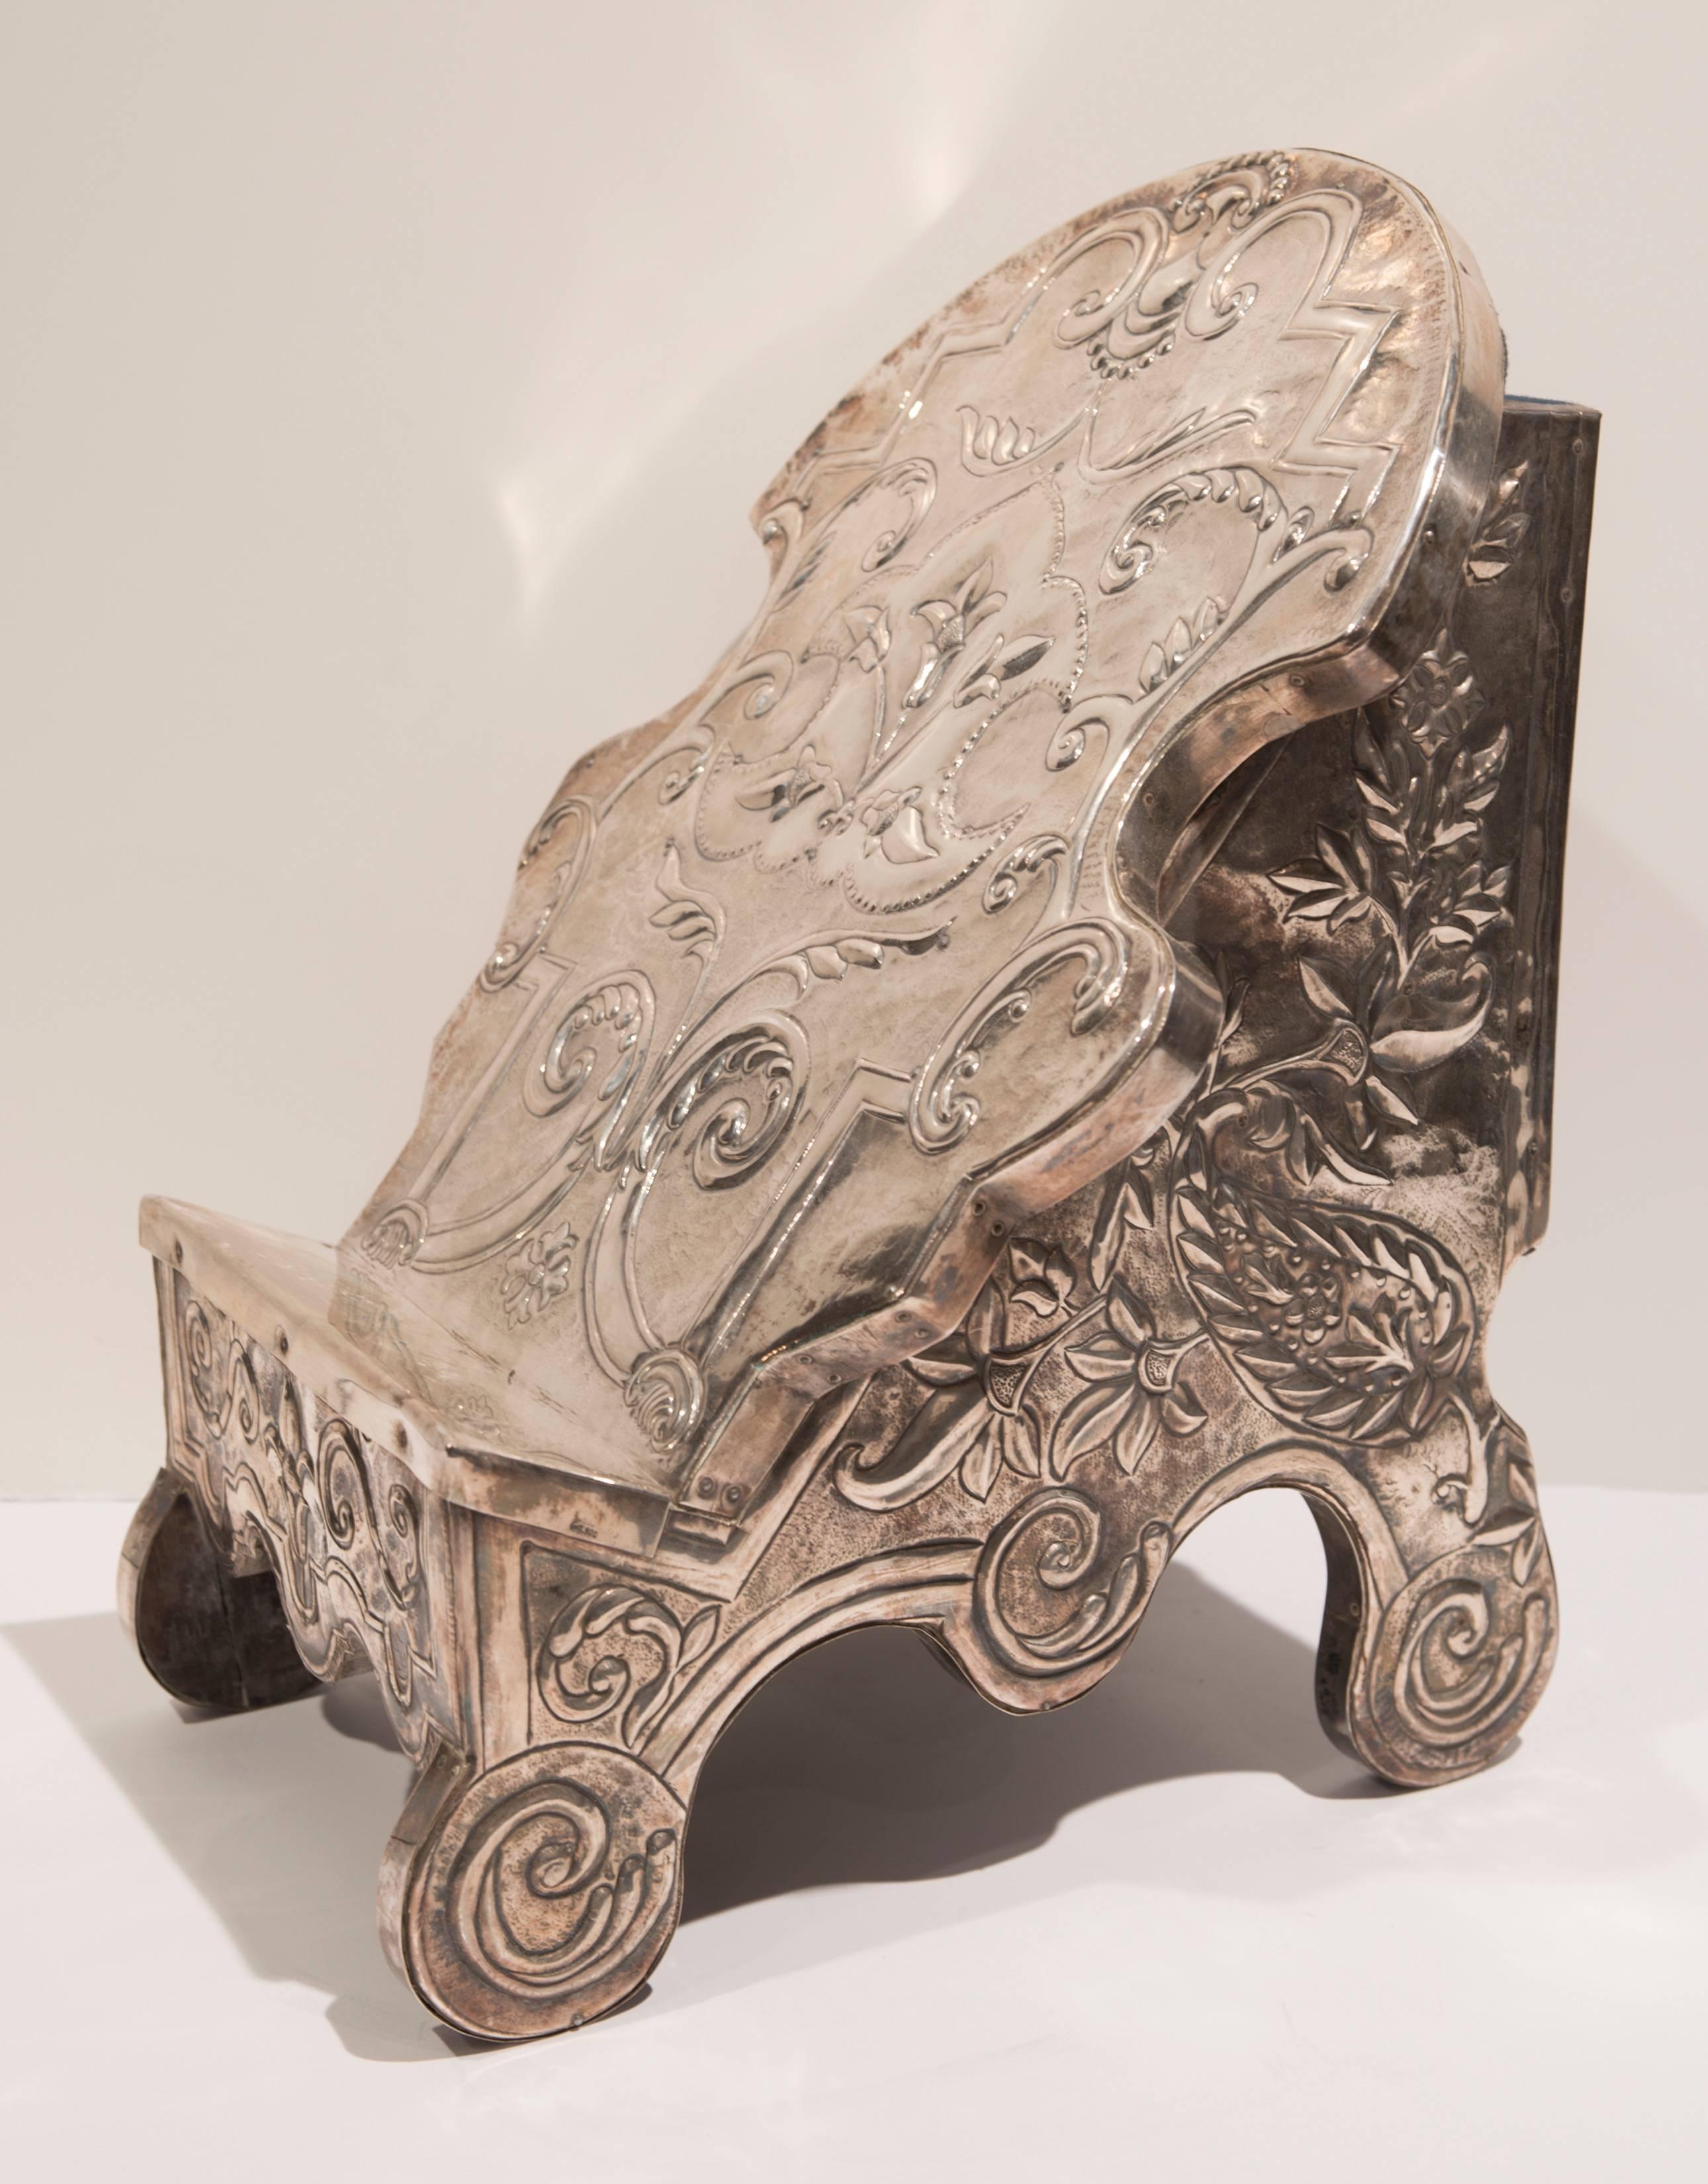 "18th Century Peruvian Silver Bible Stand"
Peru ca, 1790 
Silver and Wood 
14" x 11" x 11" inches